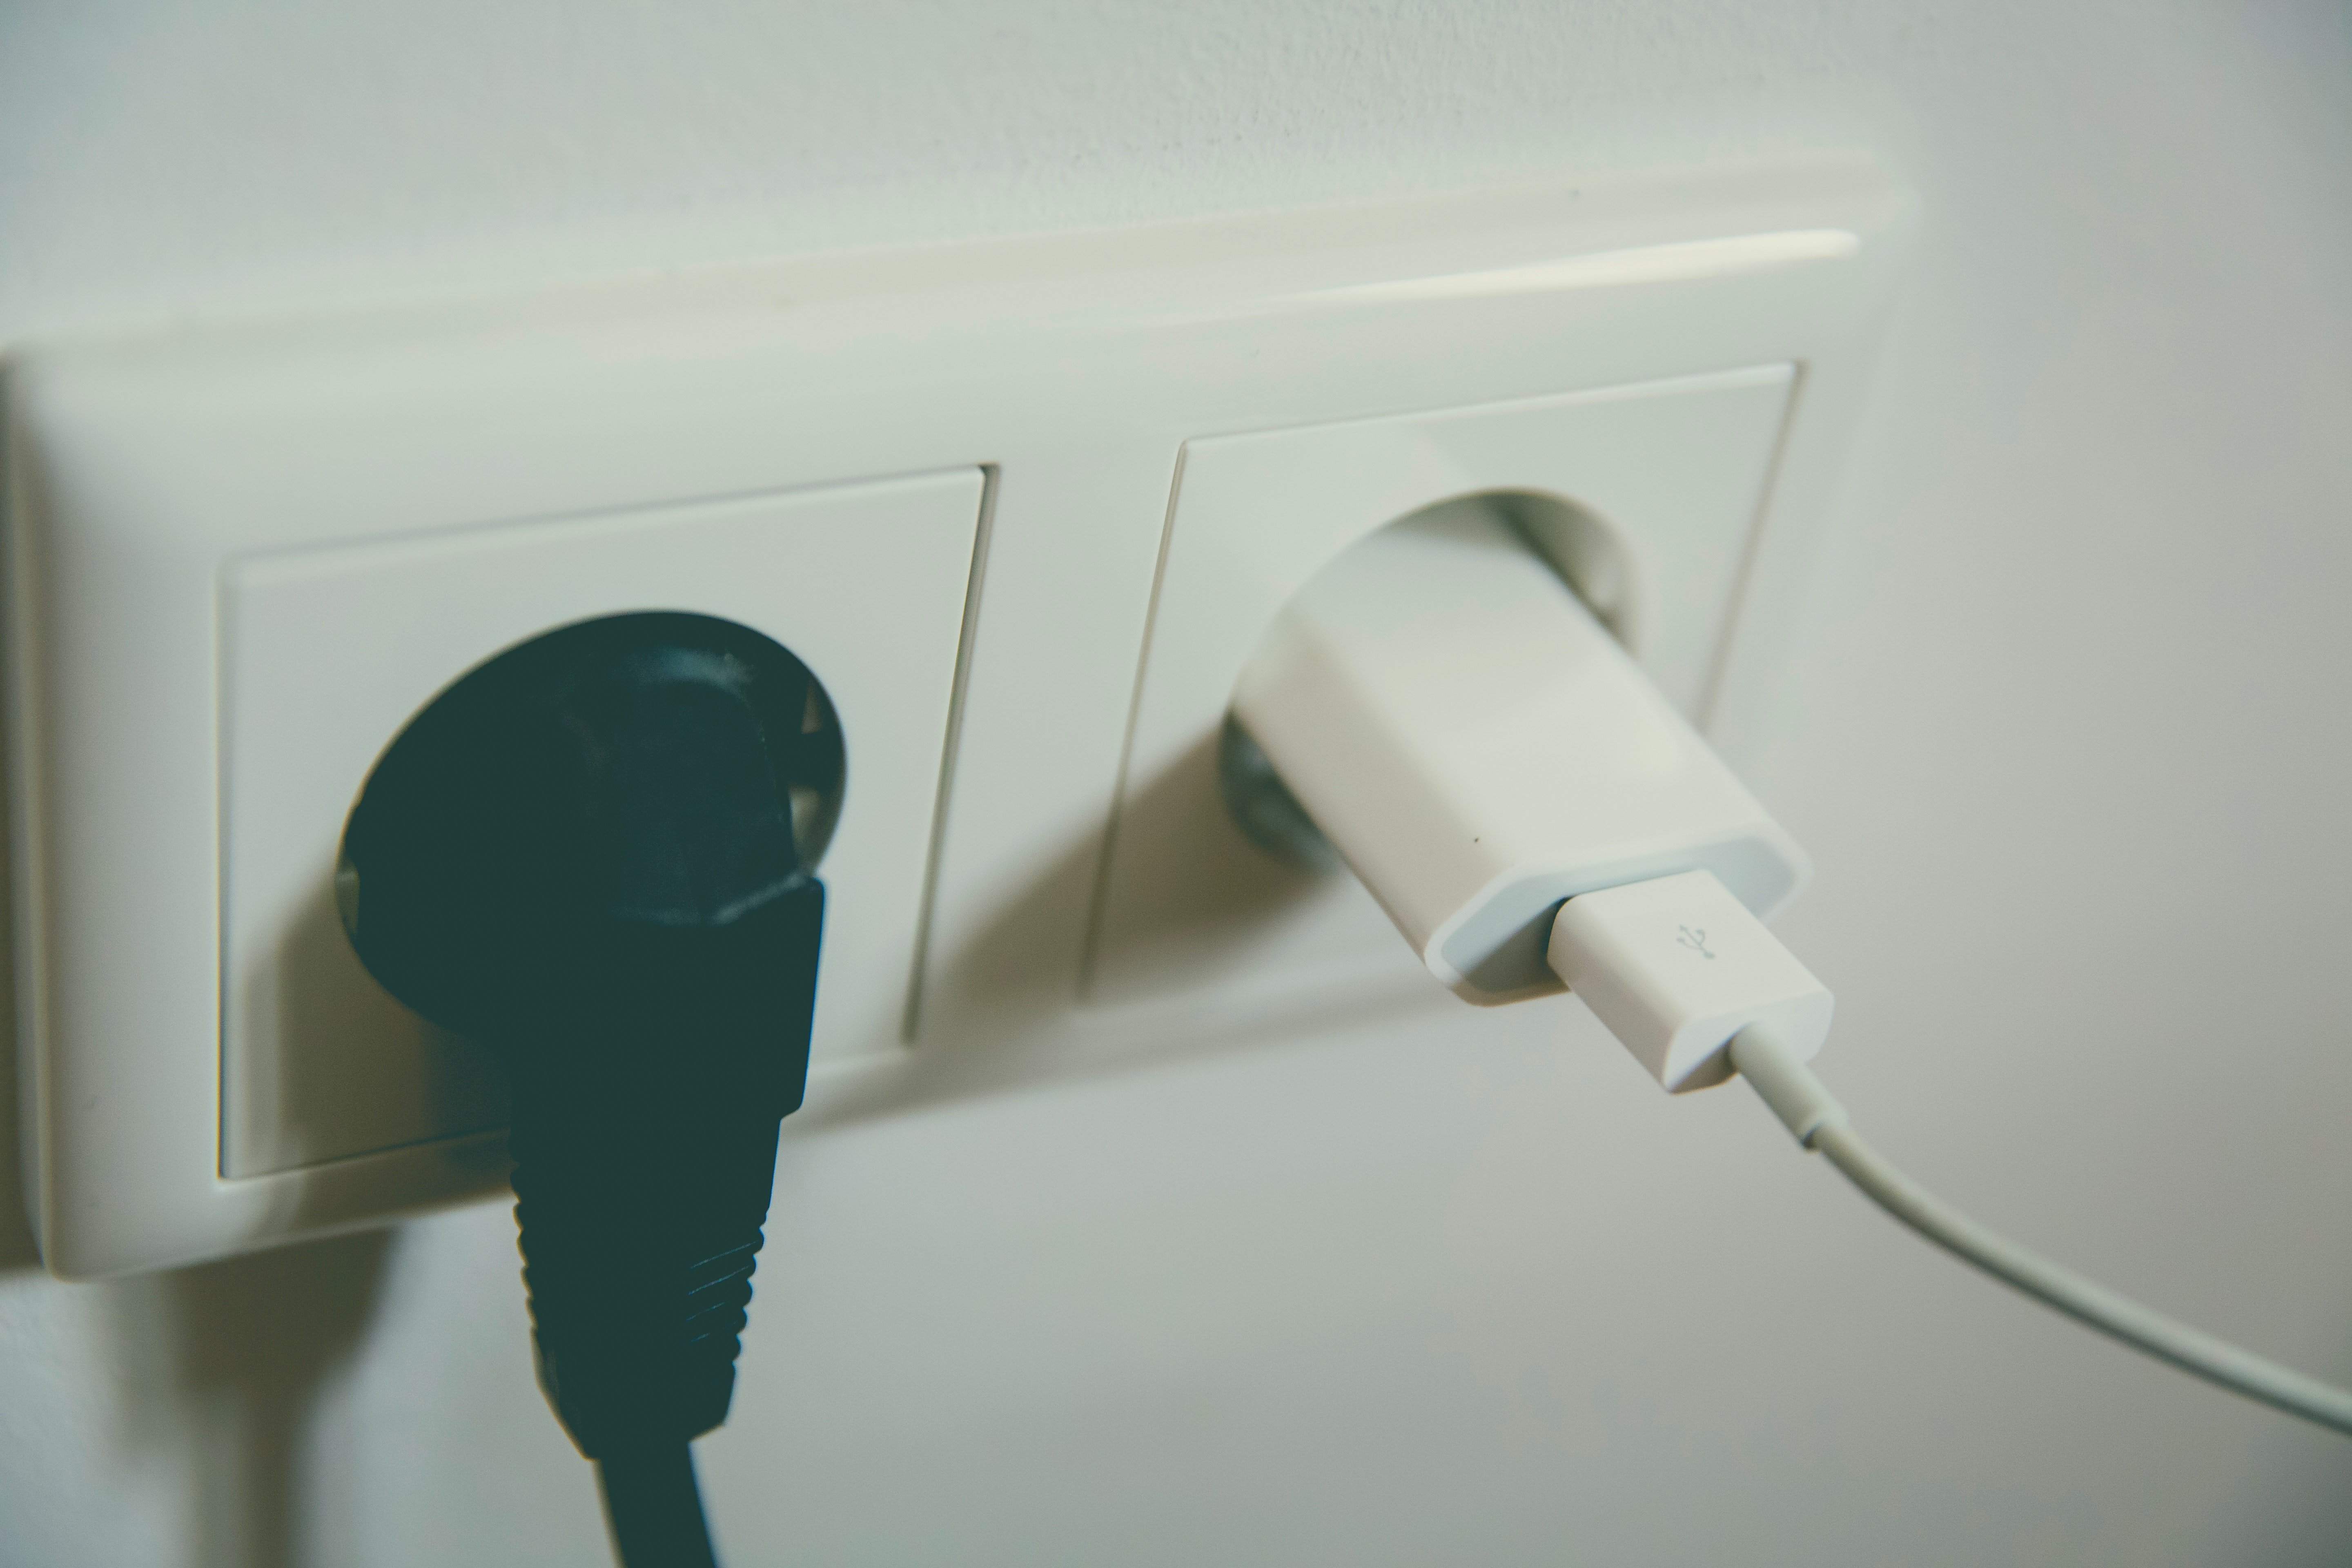 Plugged in cables | Source: Pexels